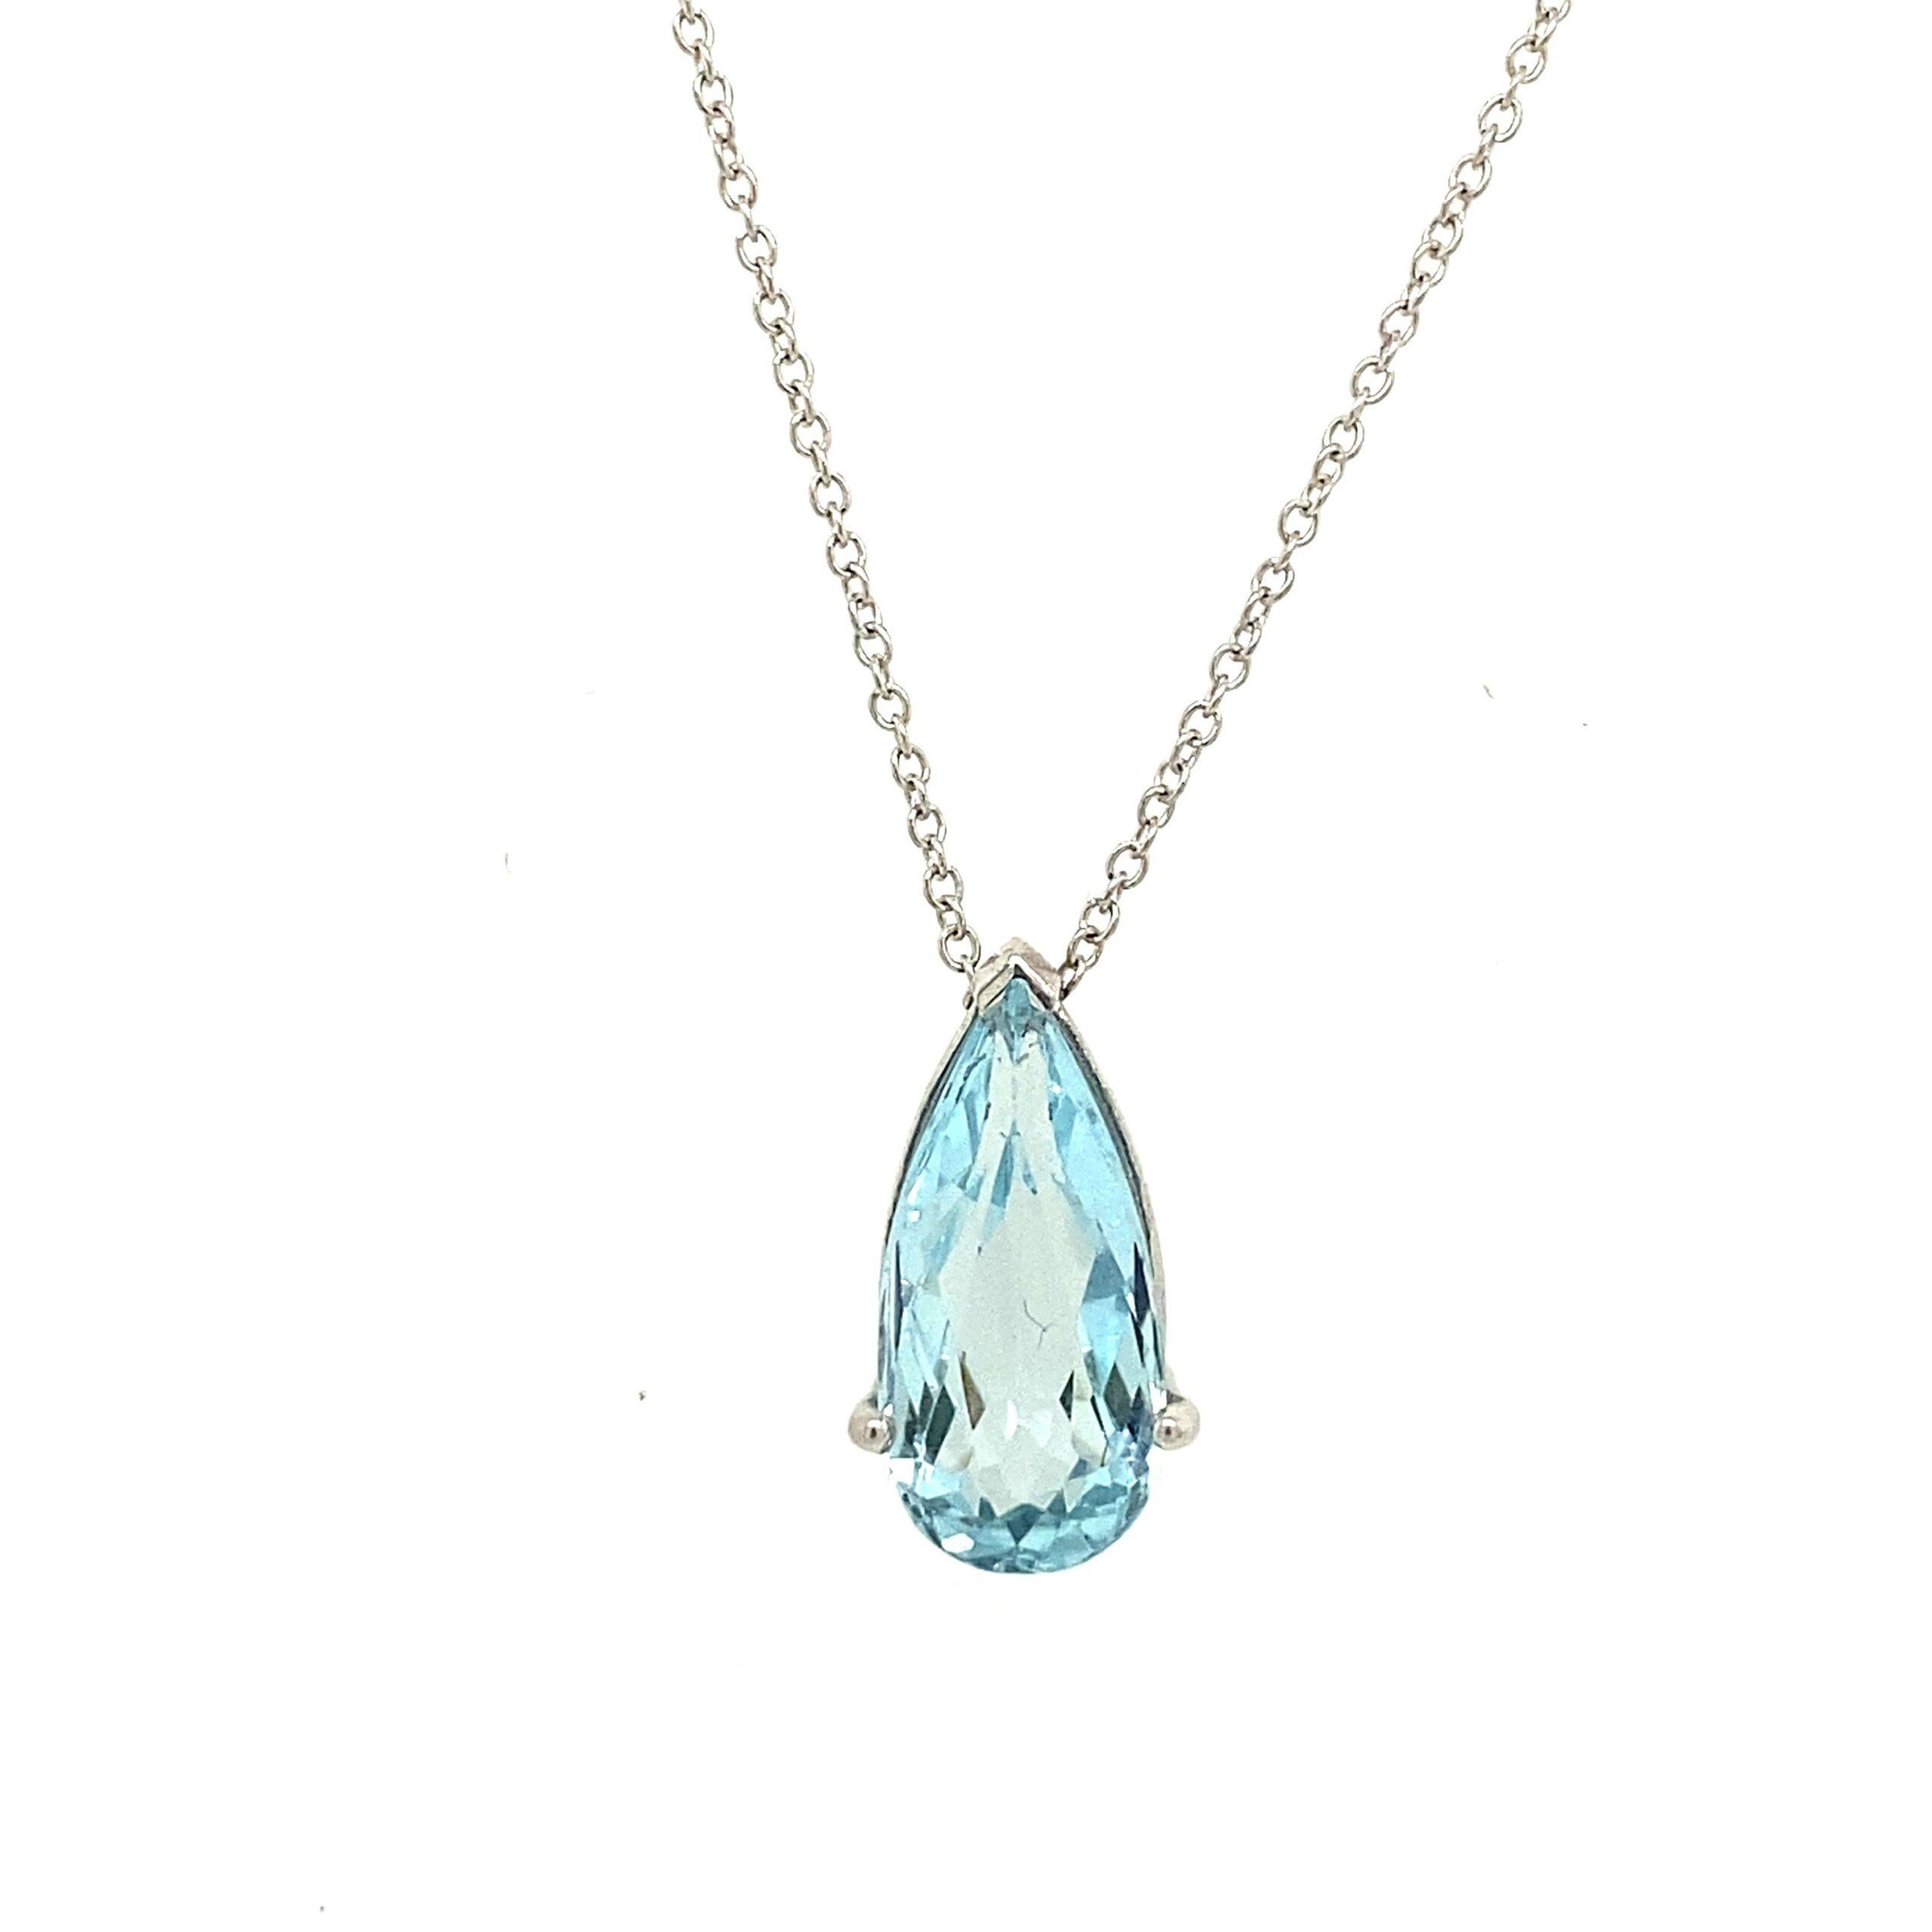 18ct White Gold Fine Quality 3.32ct Pear Shape Aquamarine Pendant & Chain.

Additional Information:
On an 18ct White Gold 16/18'' Chain
Aquamarine Weight: 3.32ct
Aquamarine Size: 15.4mm by 8.5mm 
Total Weight: 3.2g  
SMS3747